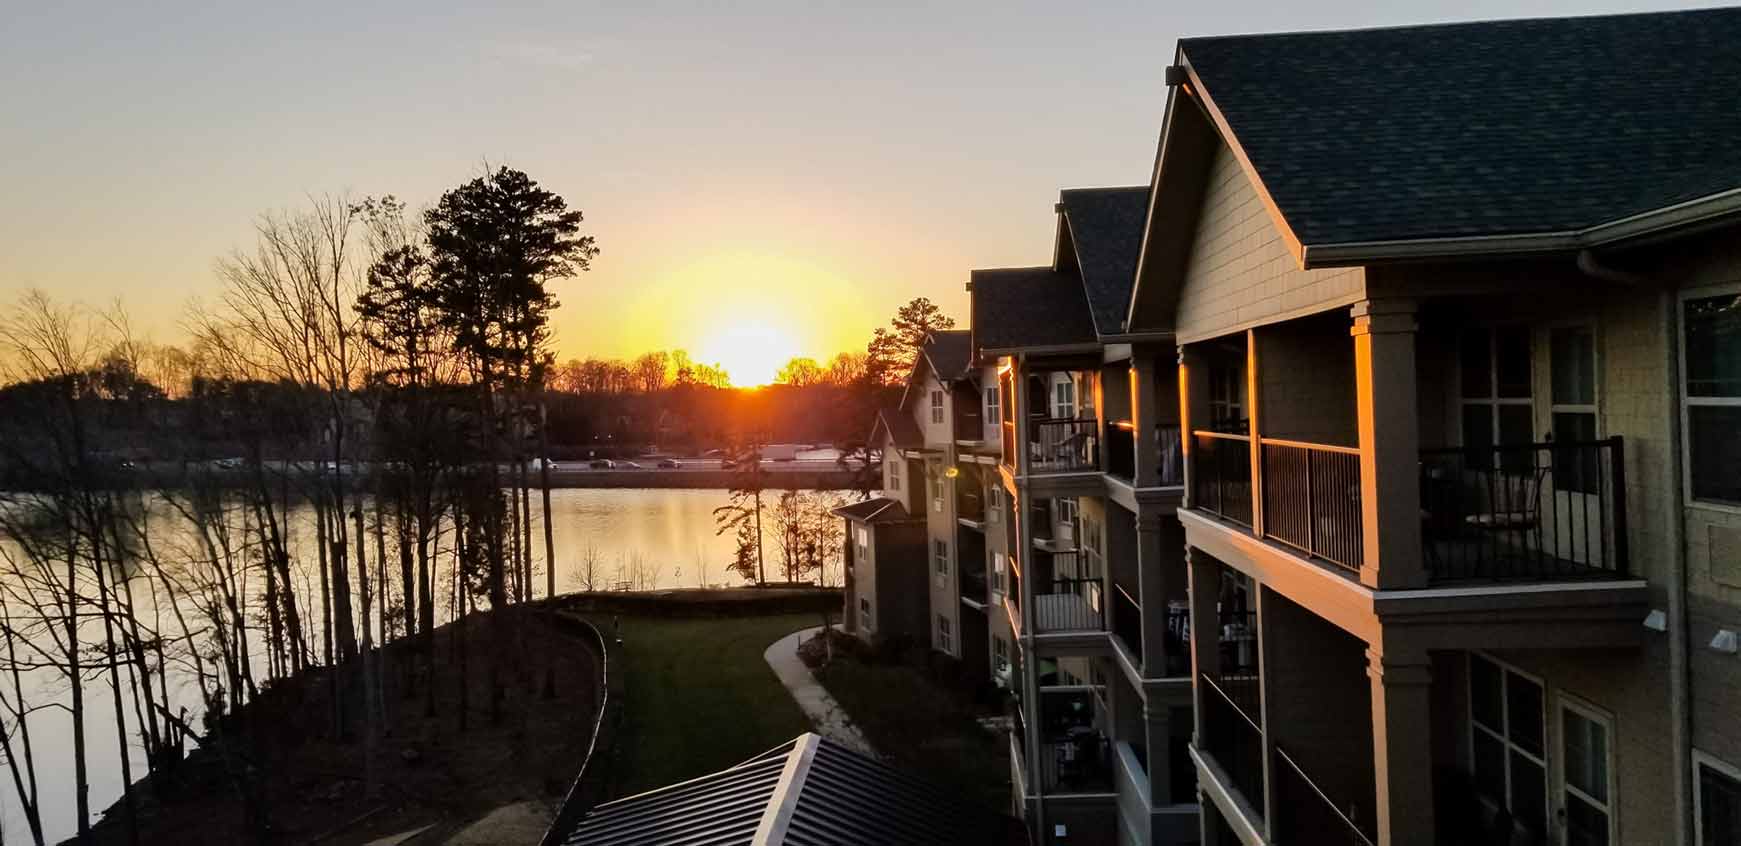 A scenic view of an apartment complex at sunset, showcasing the orange and yellow hues of the sun setting behind trees and a tranquil lake. The buildings cast shadows and reflect the warm sunlight, creating a peaceful atmosphere.